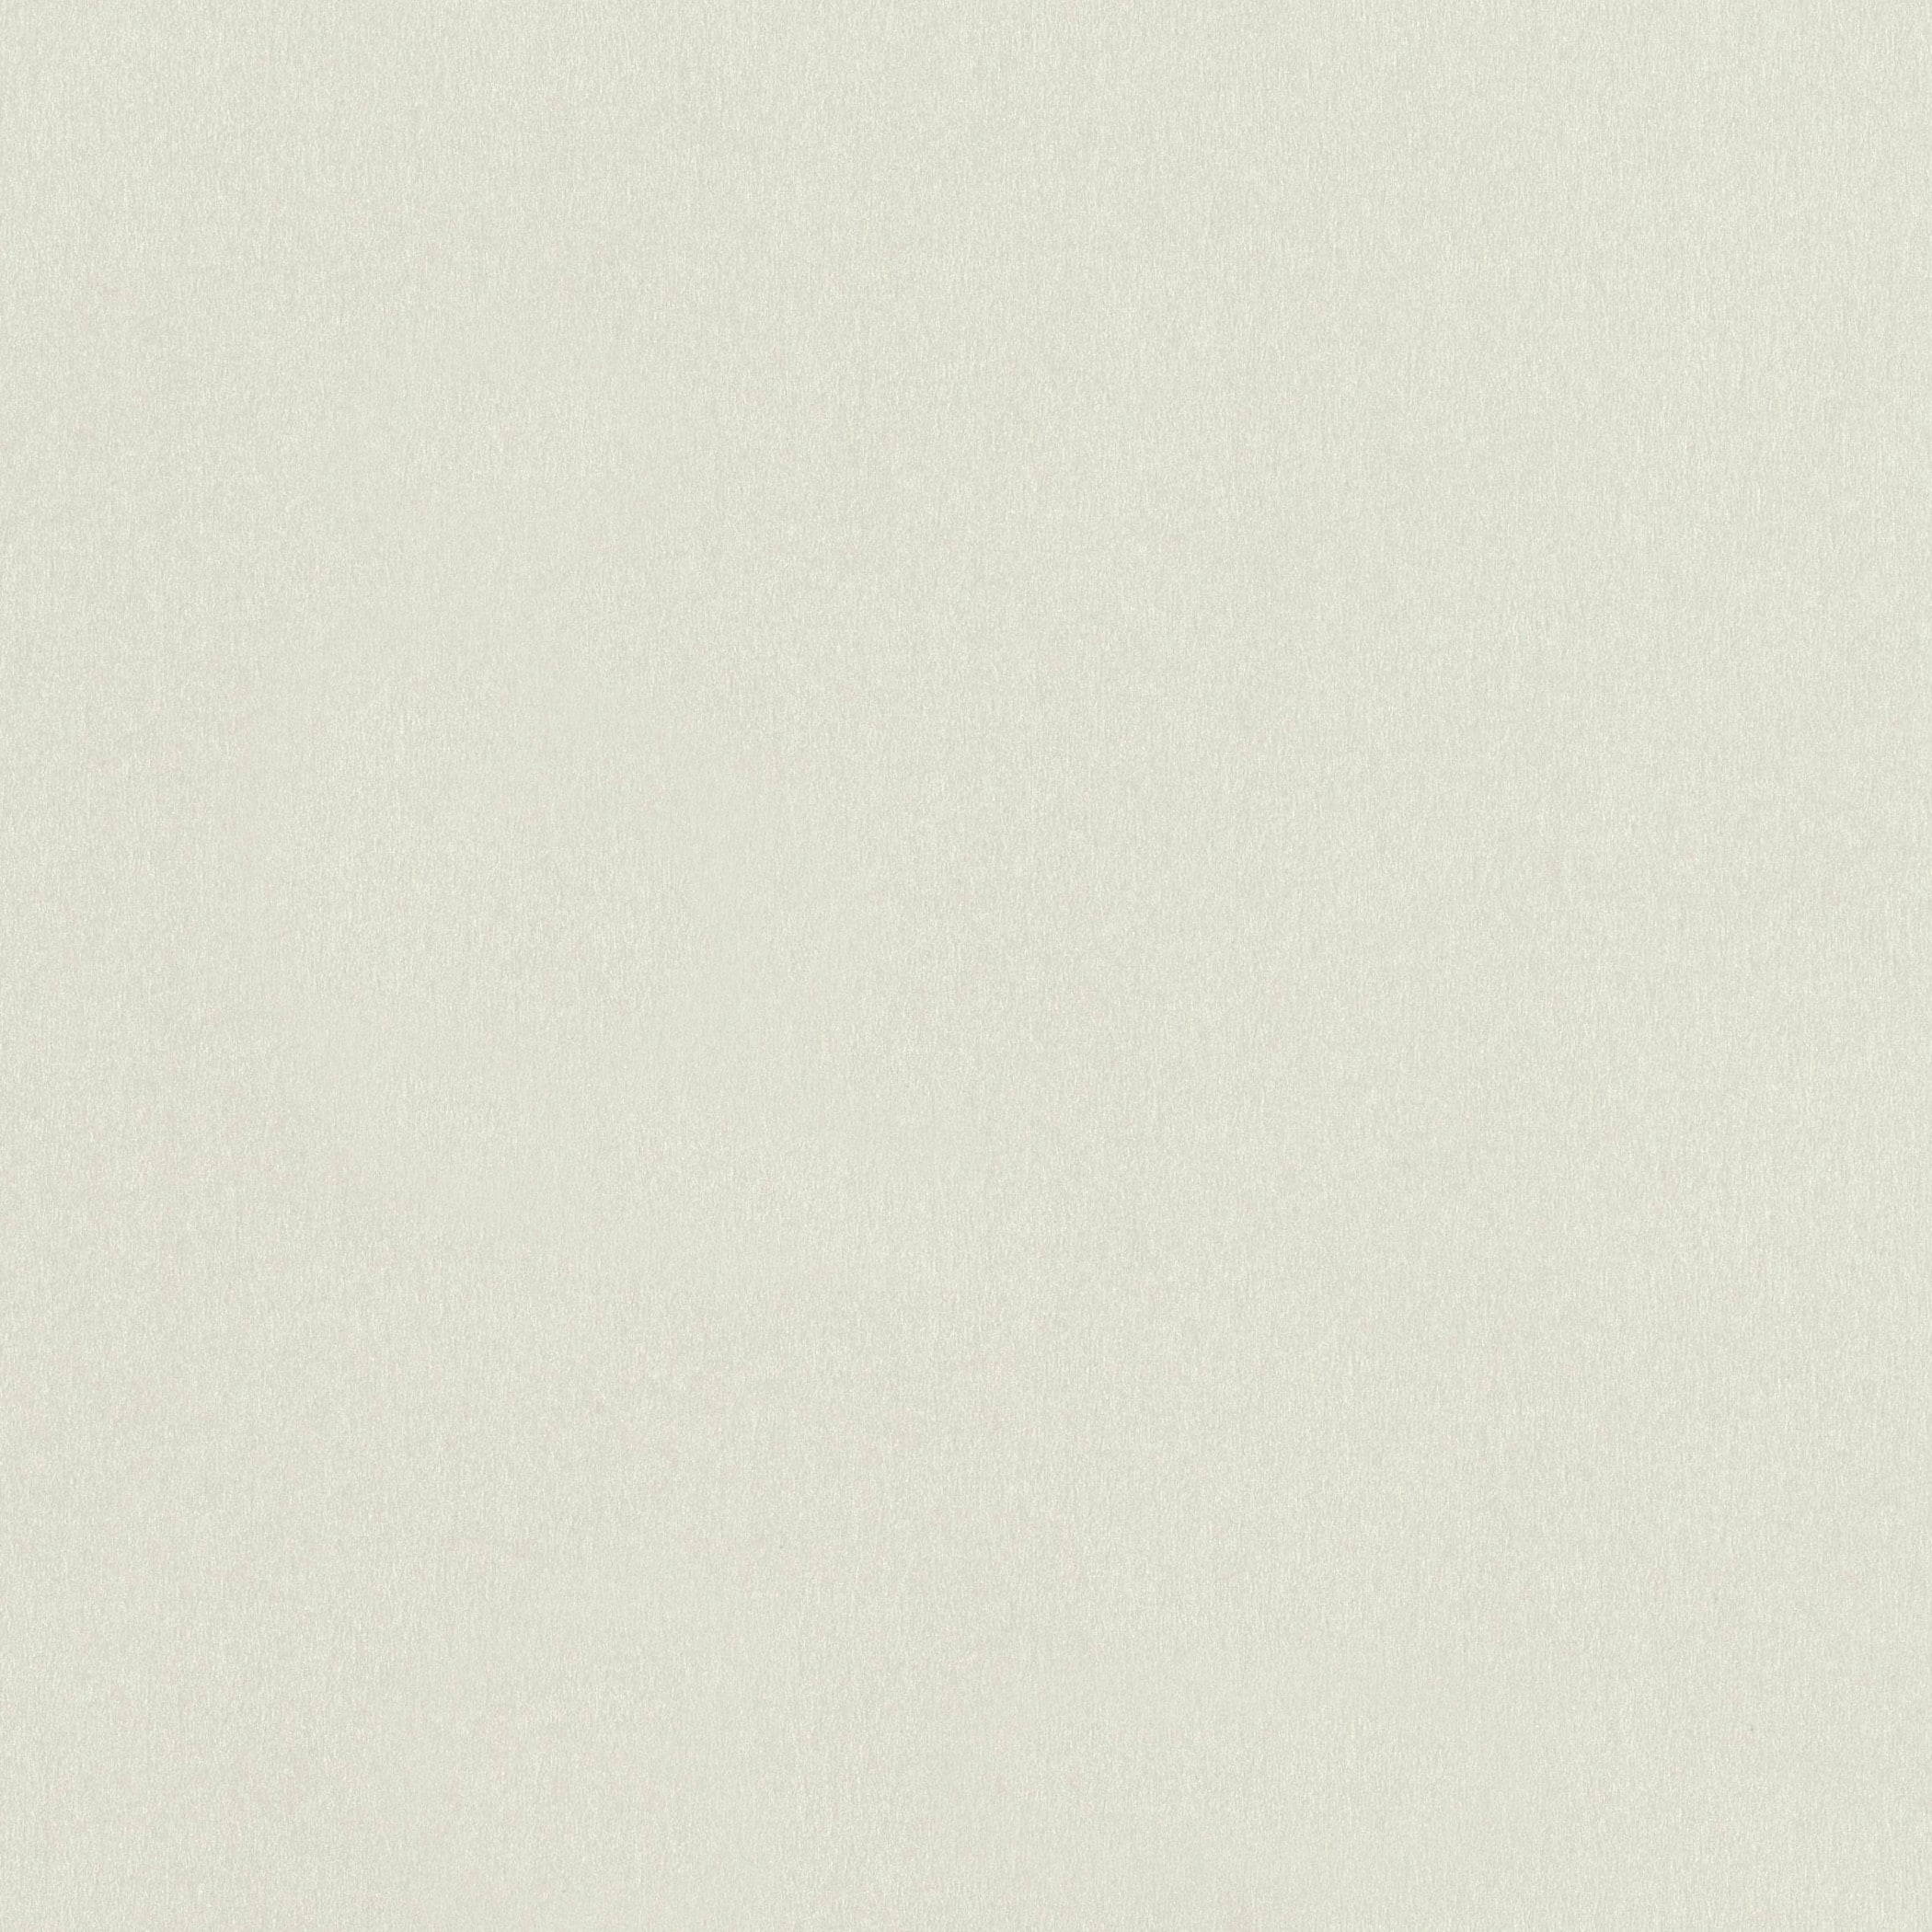 Pearlescent White Cardstock - 12 x 12 inch - 105Lb Cover - 10 Sheets -  Clear Path Paper